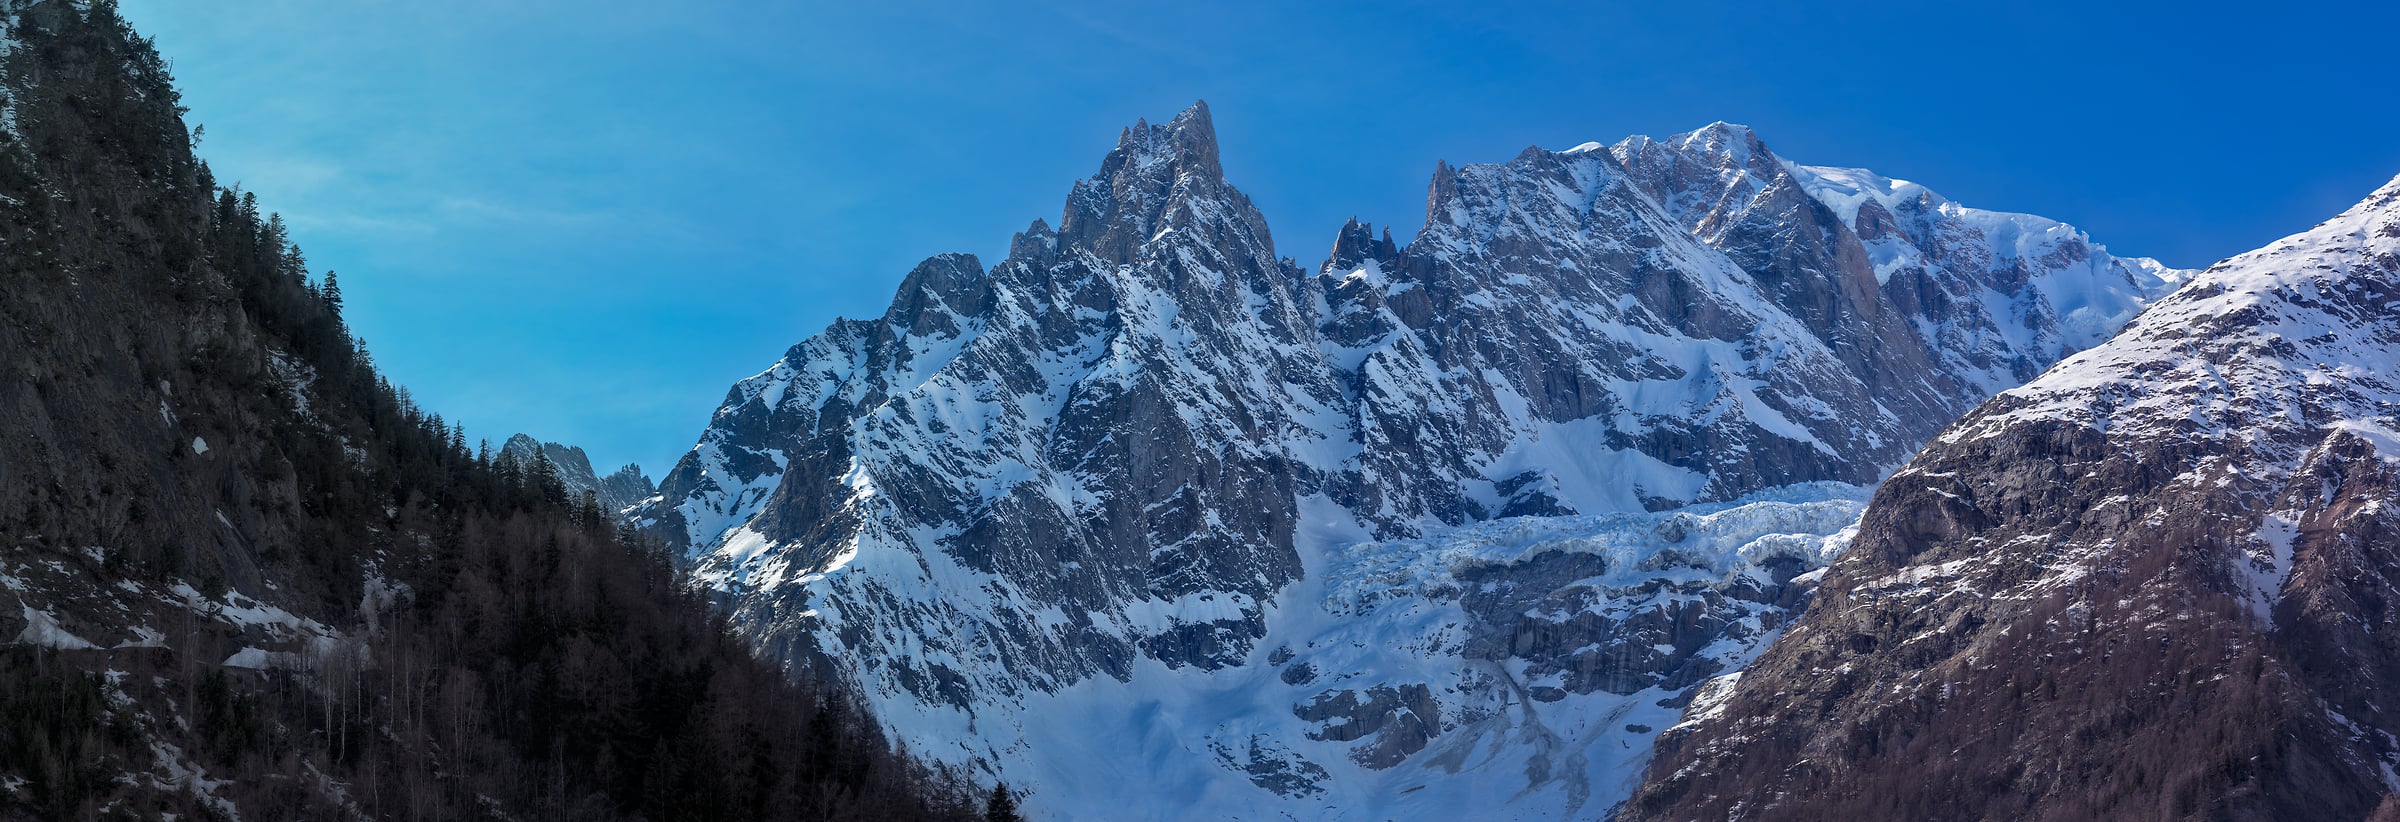 1,474 megapixels! A very high resolution, large-format VAST photo print of Mont Blanc with Aiguille Noire de Peuterey and Brenva Glacier; landscape photograph created by Duilio Fiorille in Courmayeur, Aosta Valley, Italy.